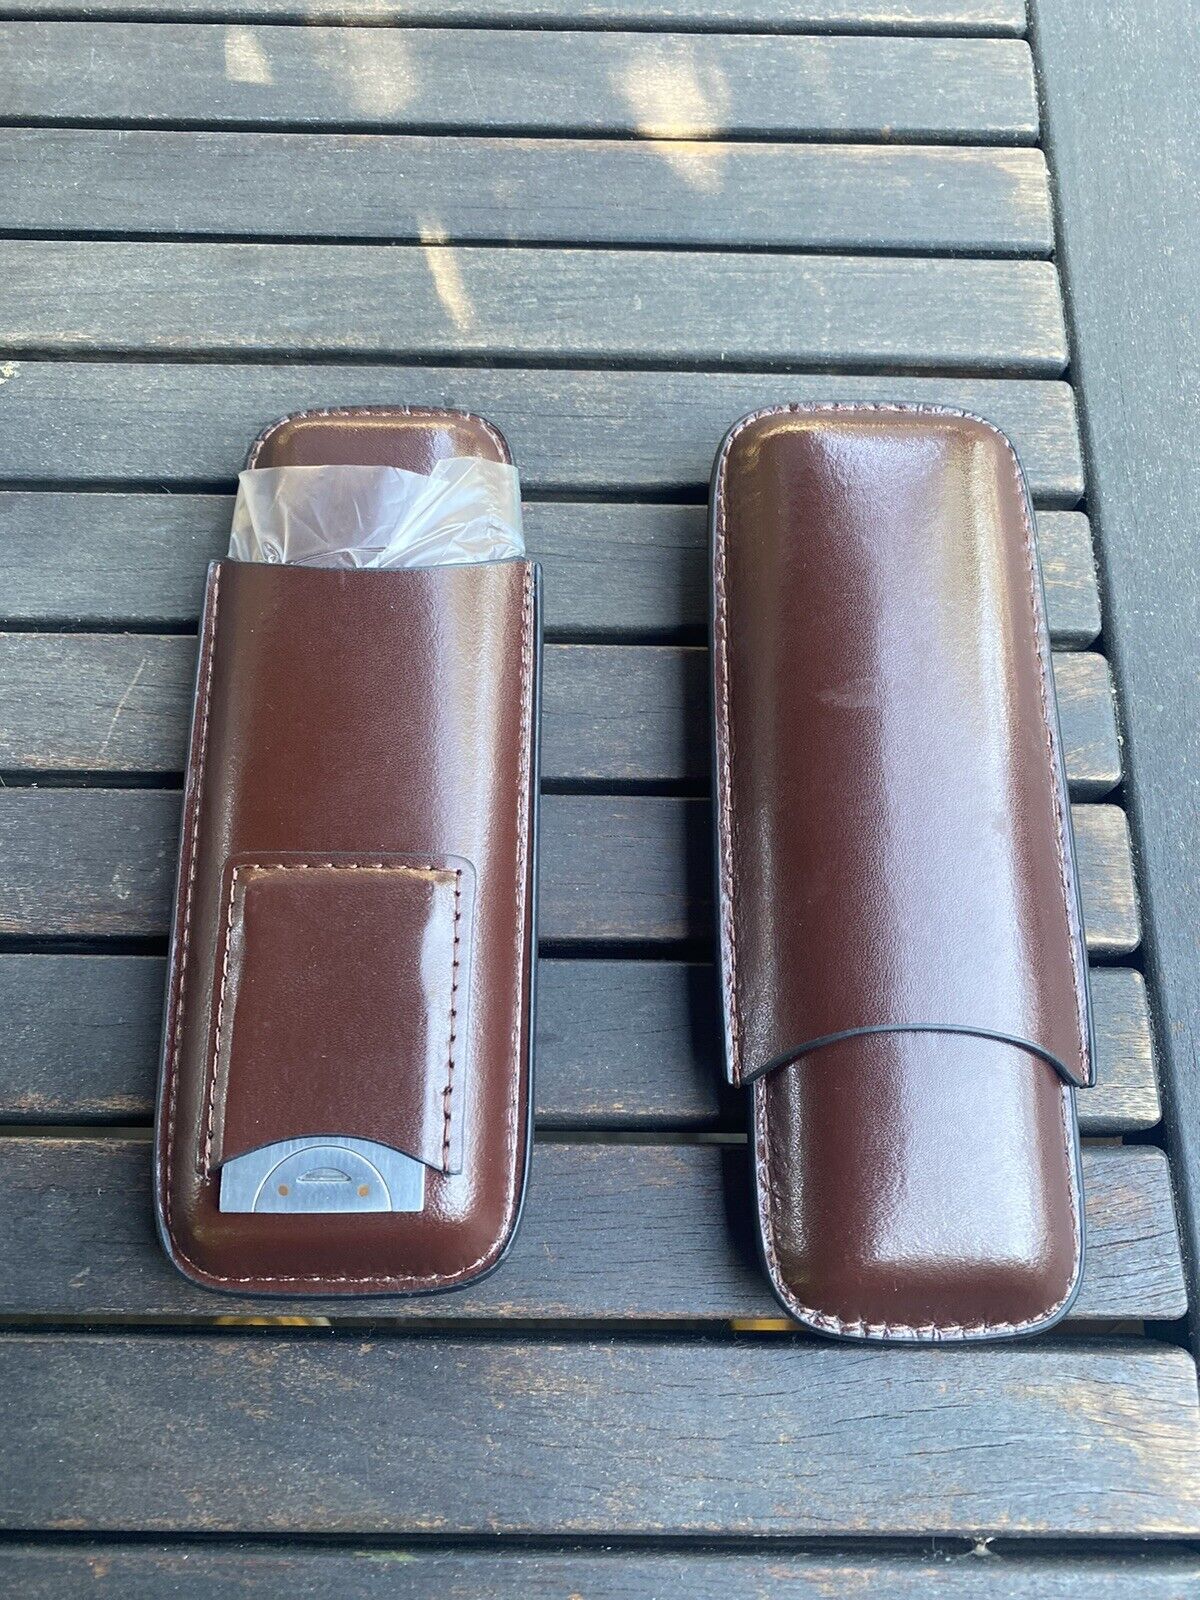 2 BROWN Leather Twin Cigar Case Brand Spanking New